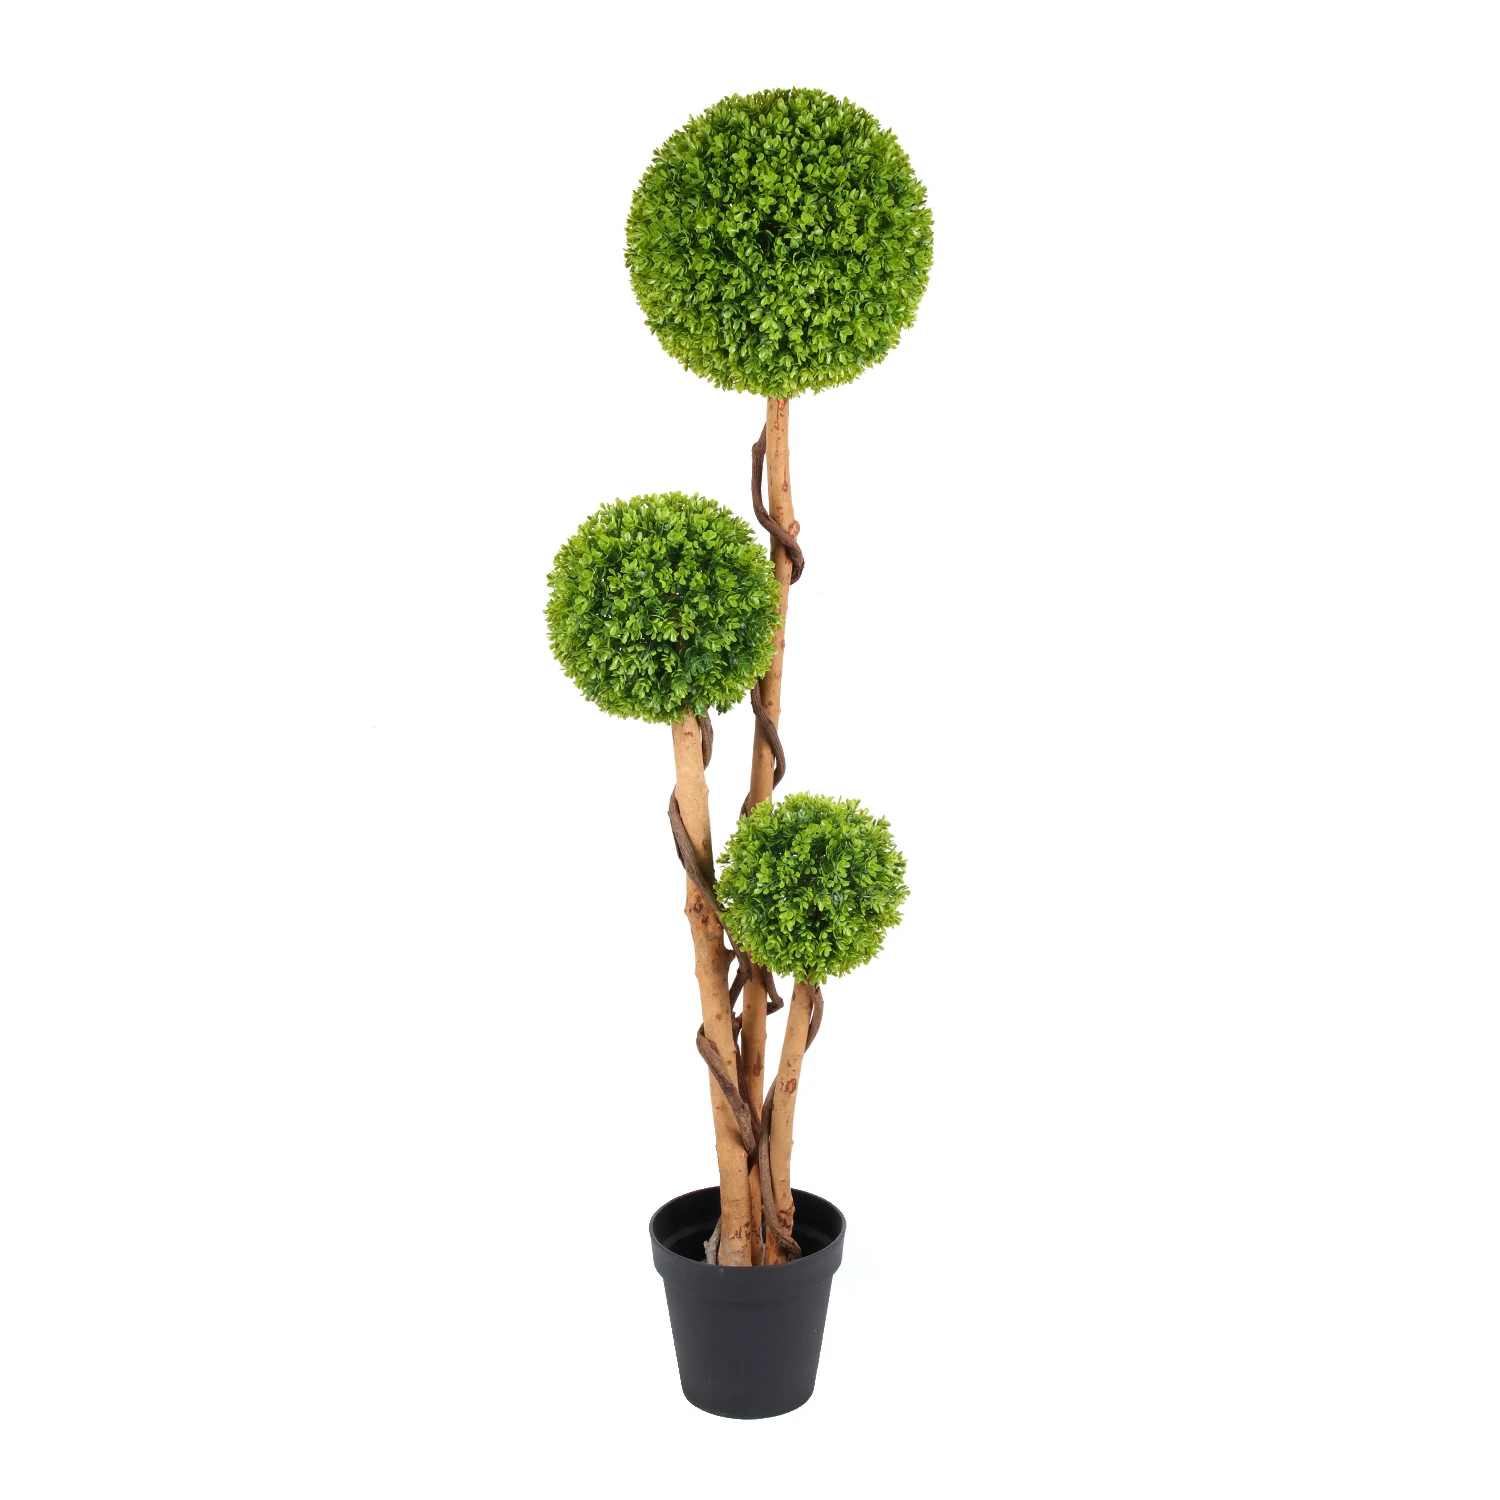 Indoor Bonsai Trees Artificial Plant Artificial Large Potted Plants Bonsai Tree For Garden Home Decoration Buy Artificial Large Potted Plants Bonsai Trees Artificial Plant Artificial Potted Plants Product On Alibaba Com